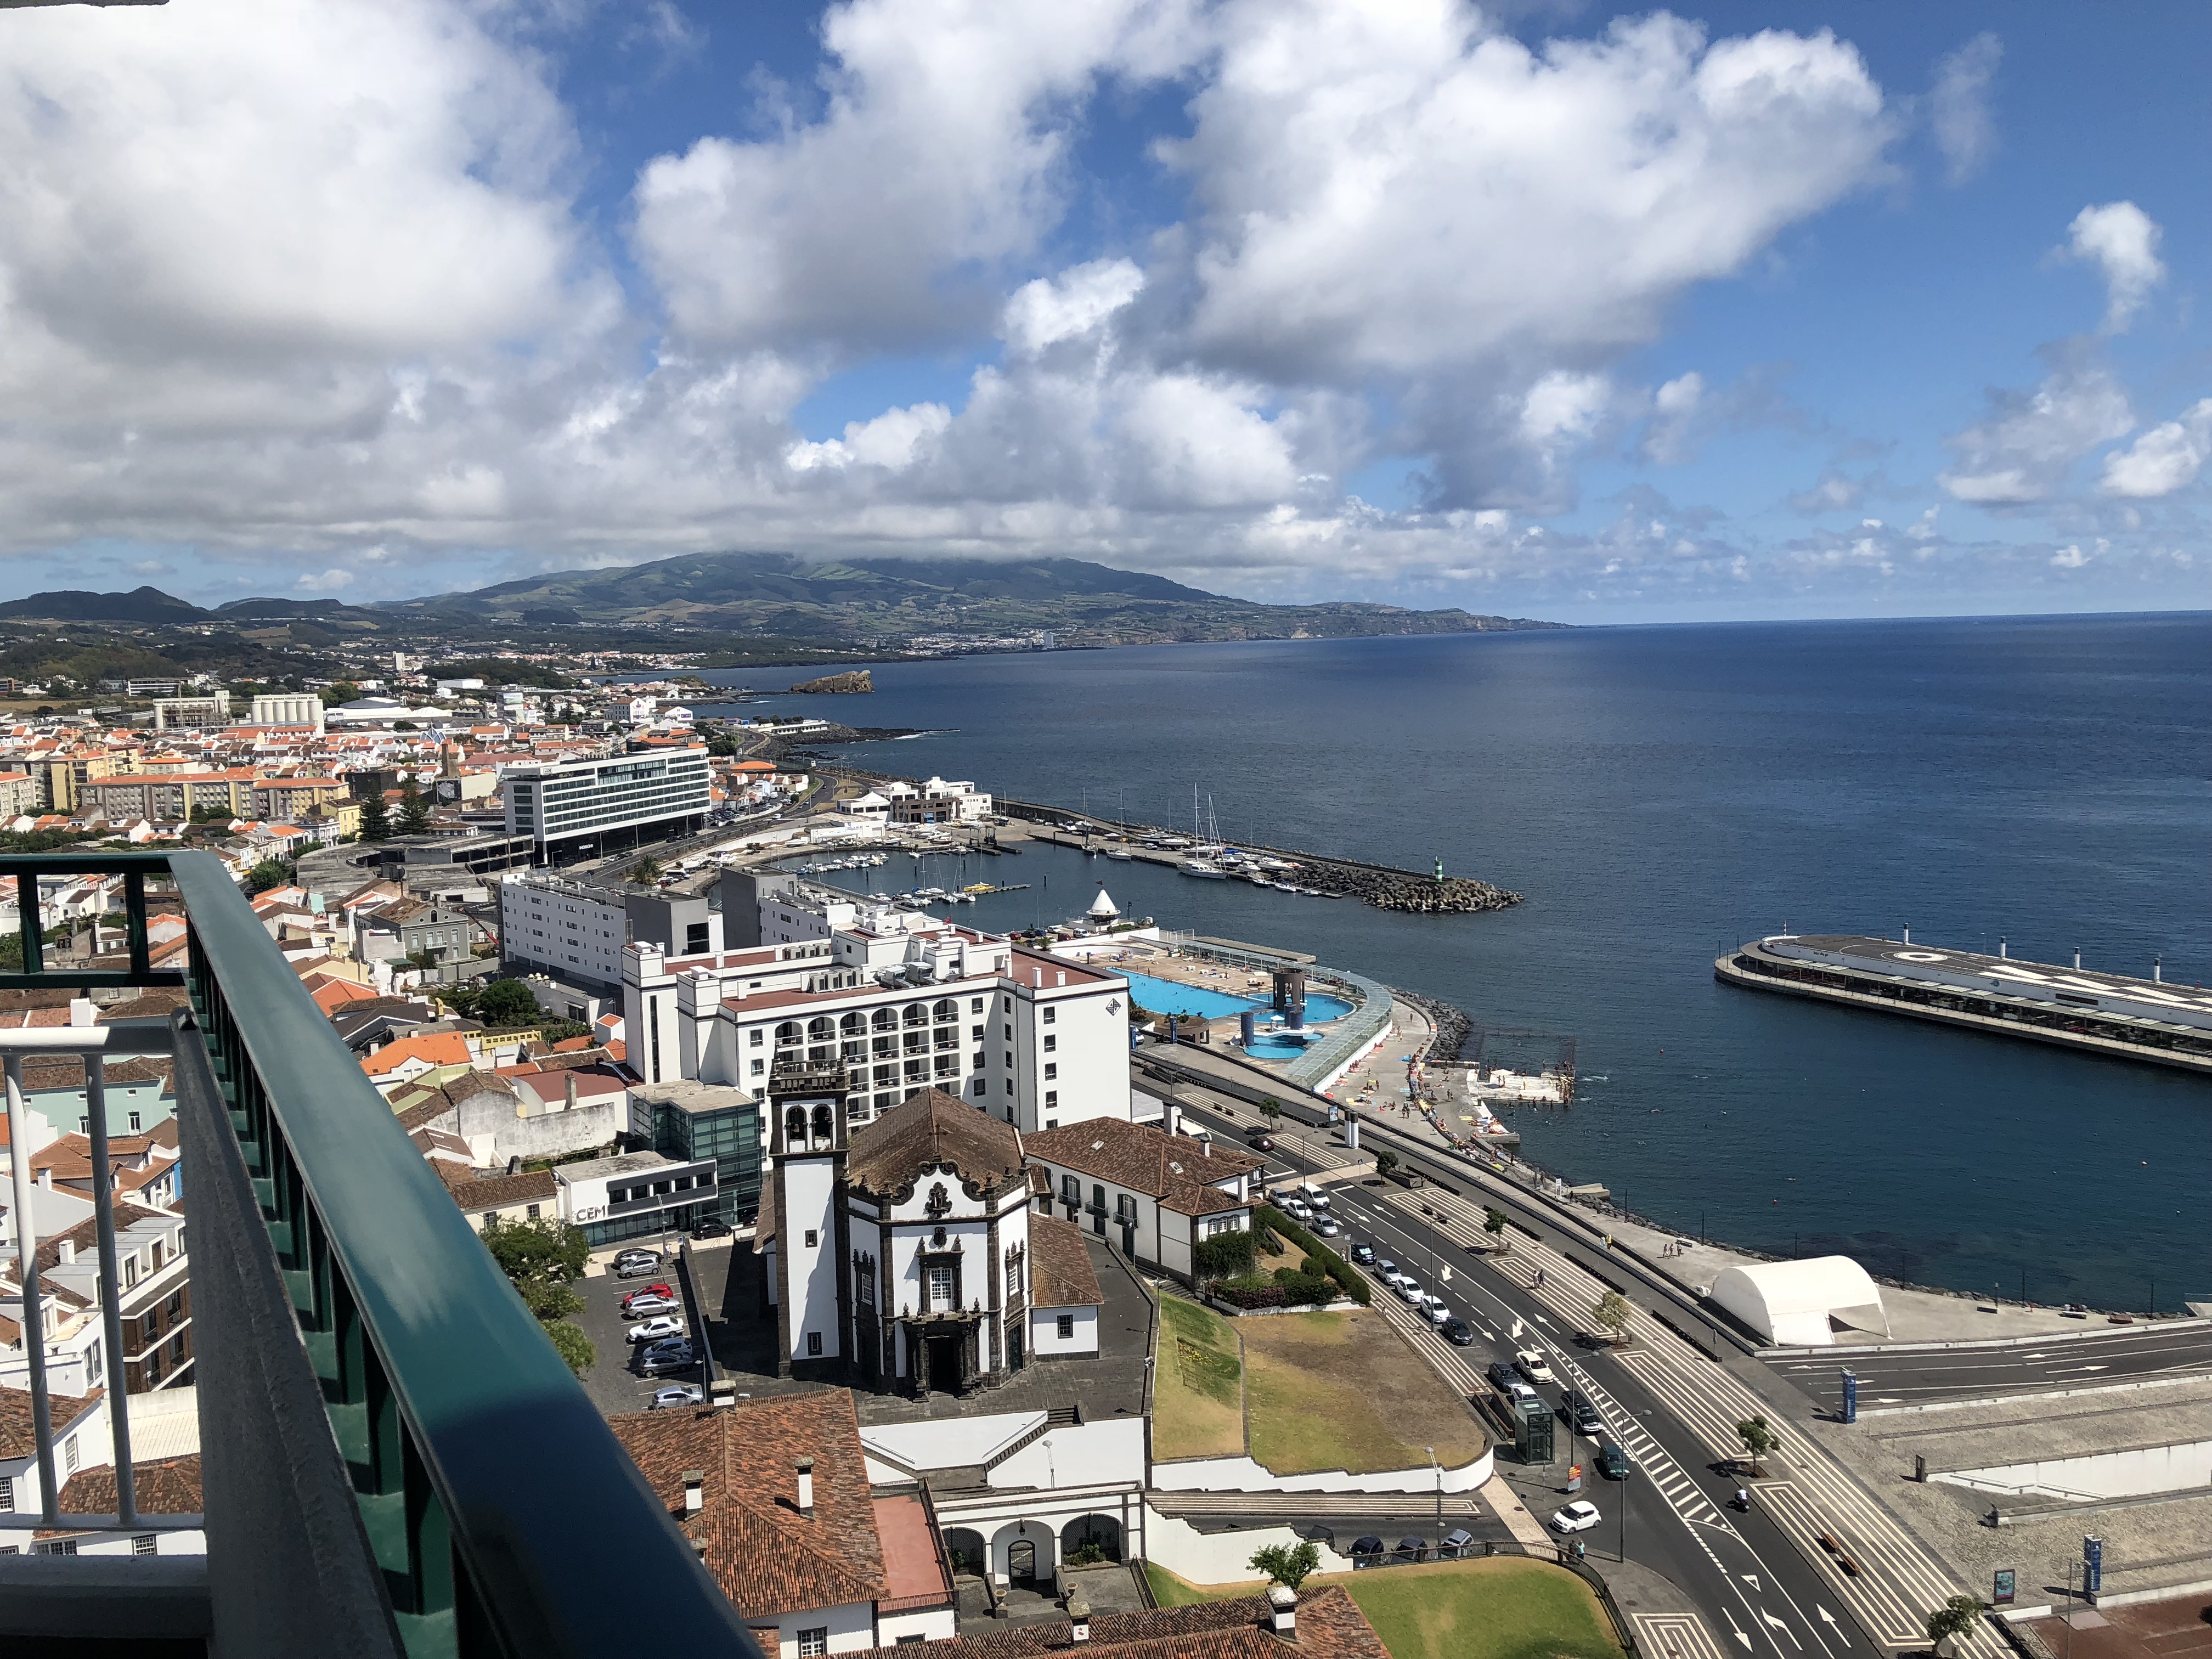 Waterfront view from a balcony in Ponta Delgada, Azores